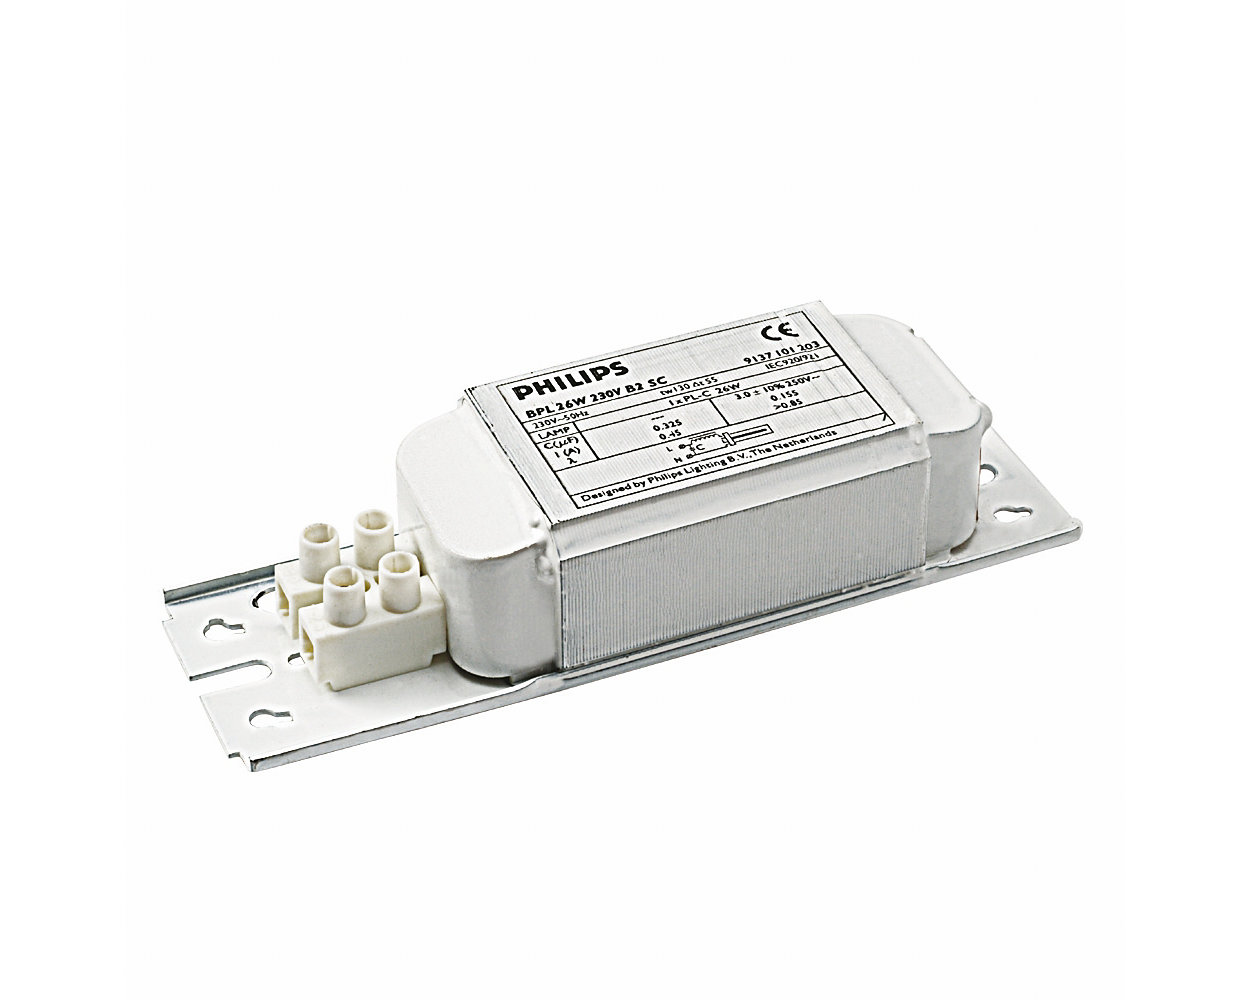 Standard electromagnetic ballast for compact fluorescent applications